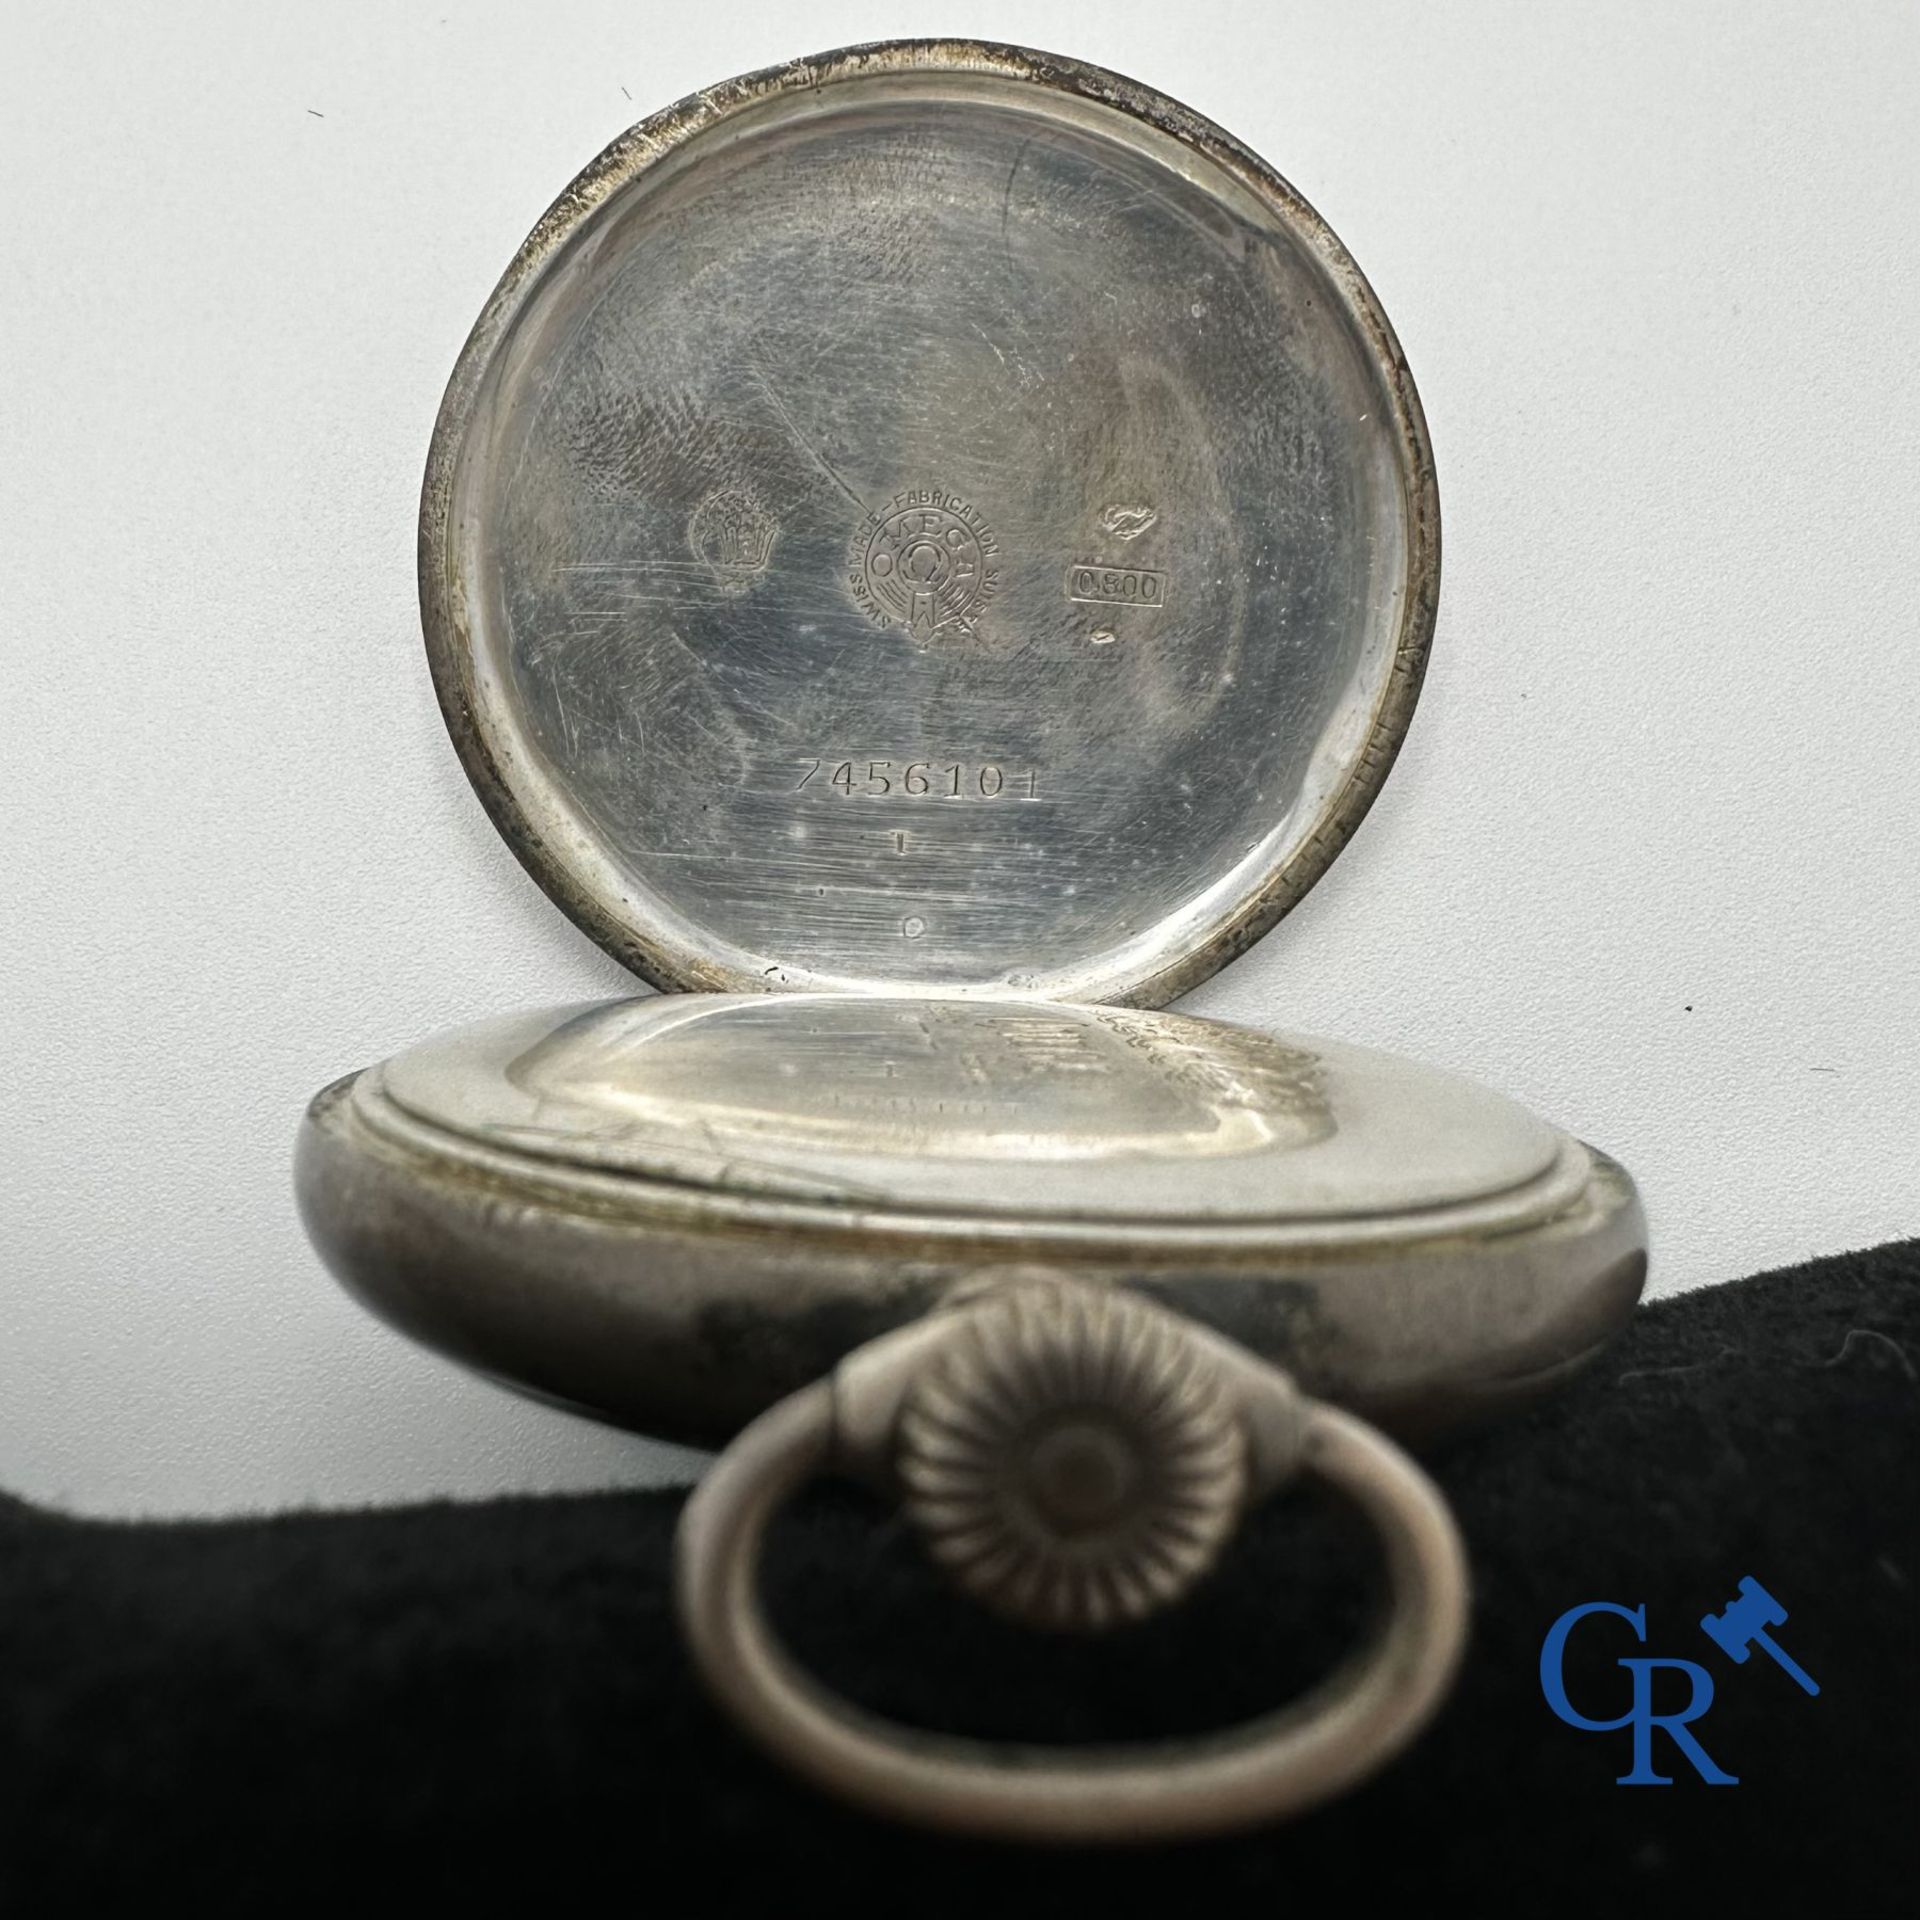 Timepieces: Oméga Genève: Lot consisting of 2 pocket watches. - Image 5 of 5